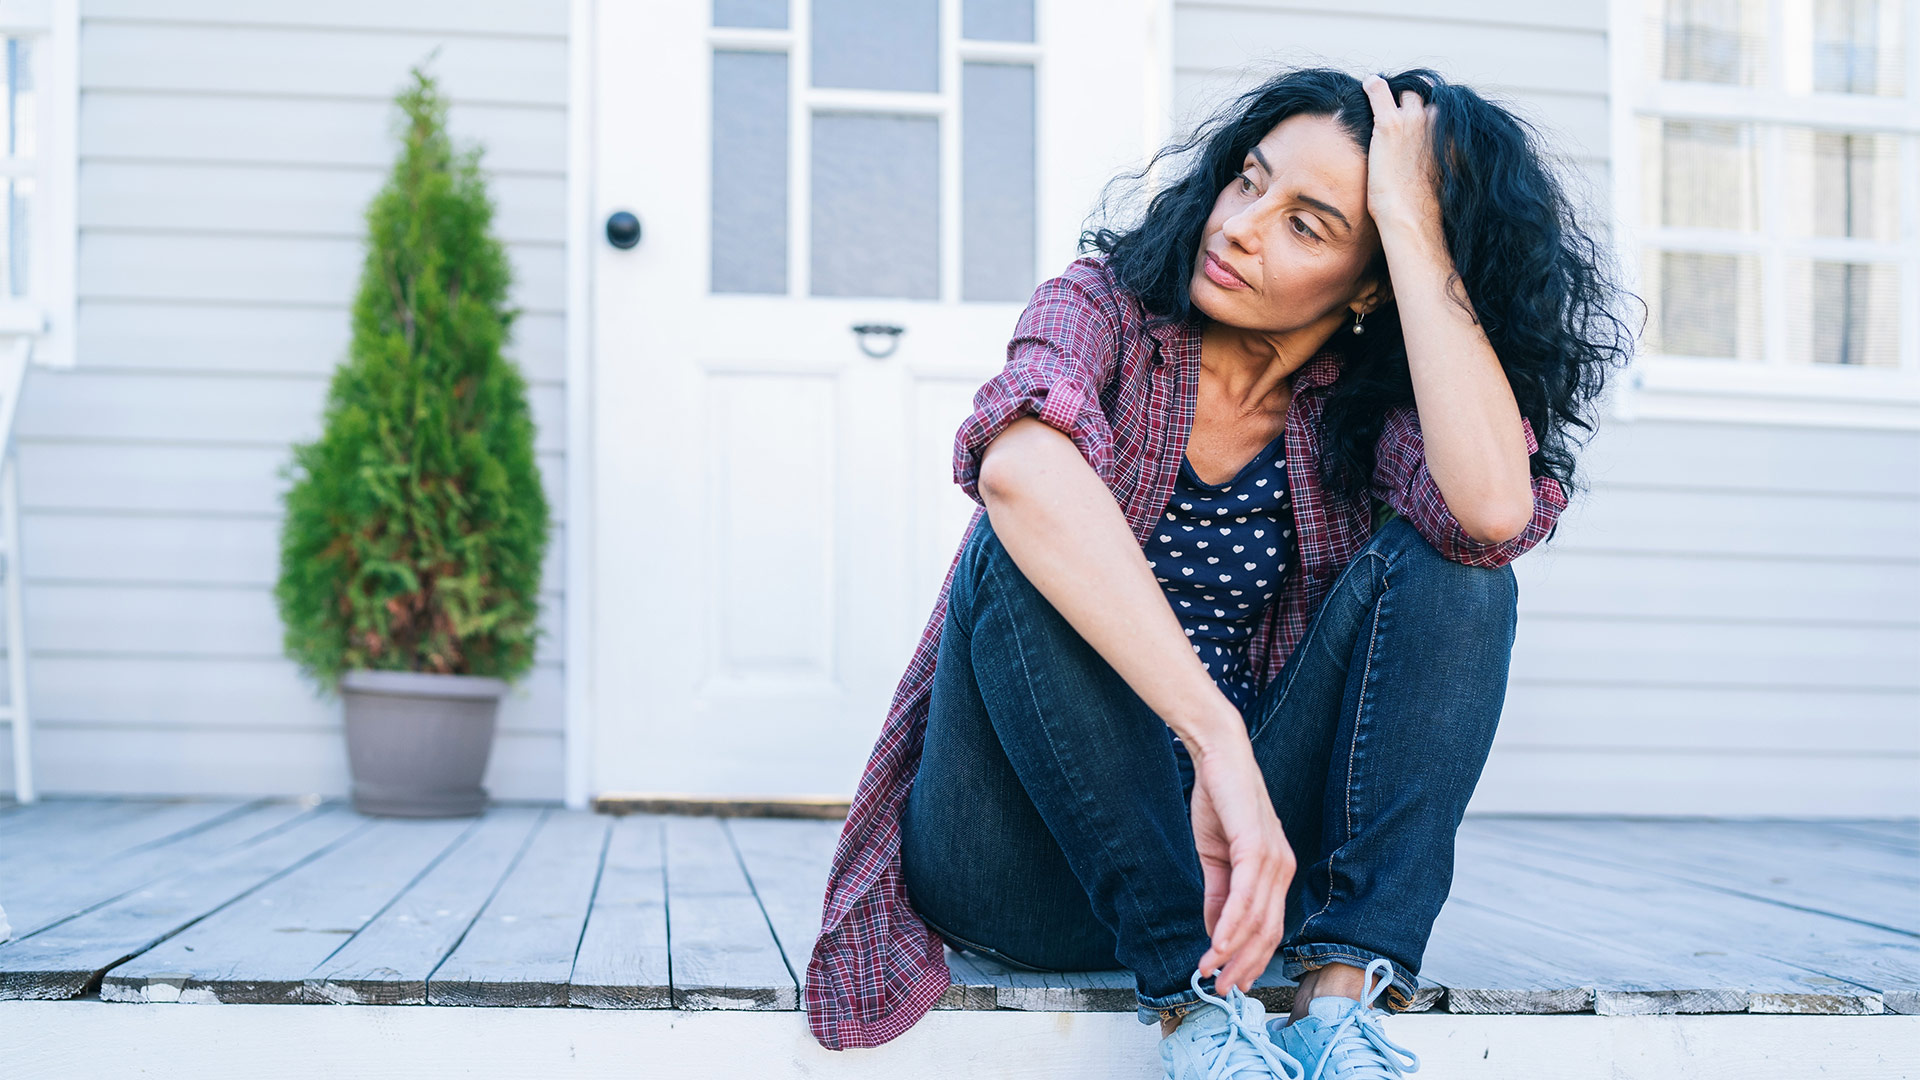 Menopause is a nearly-universal experience for women across the world. Yet for many if not most women, the intense physical, mental and emotional journey to menopause remains incredibly personal and can feel confusing, lonely and even isolating.